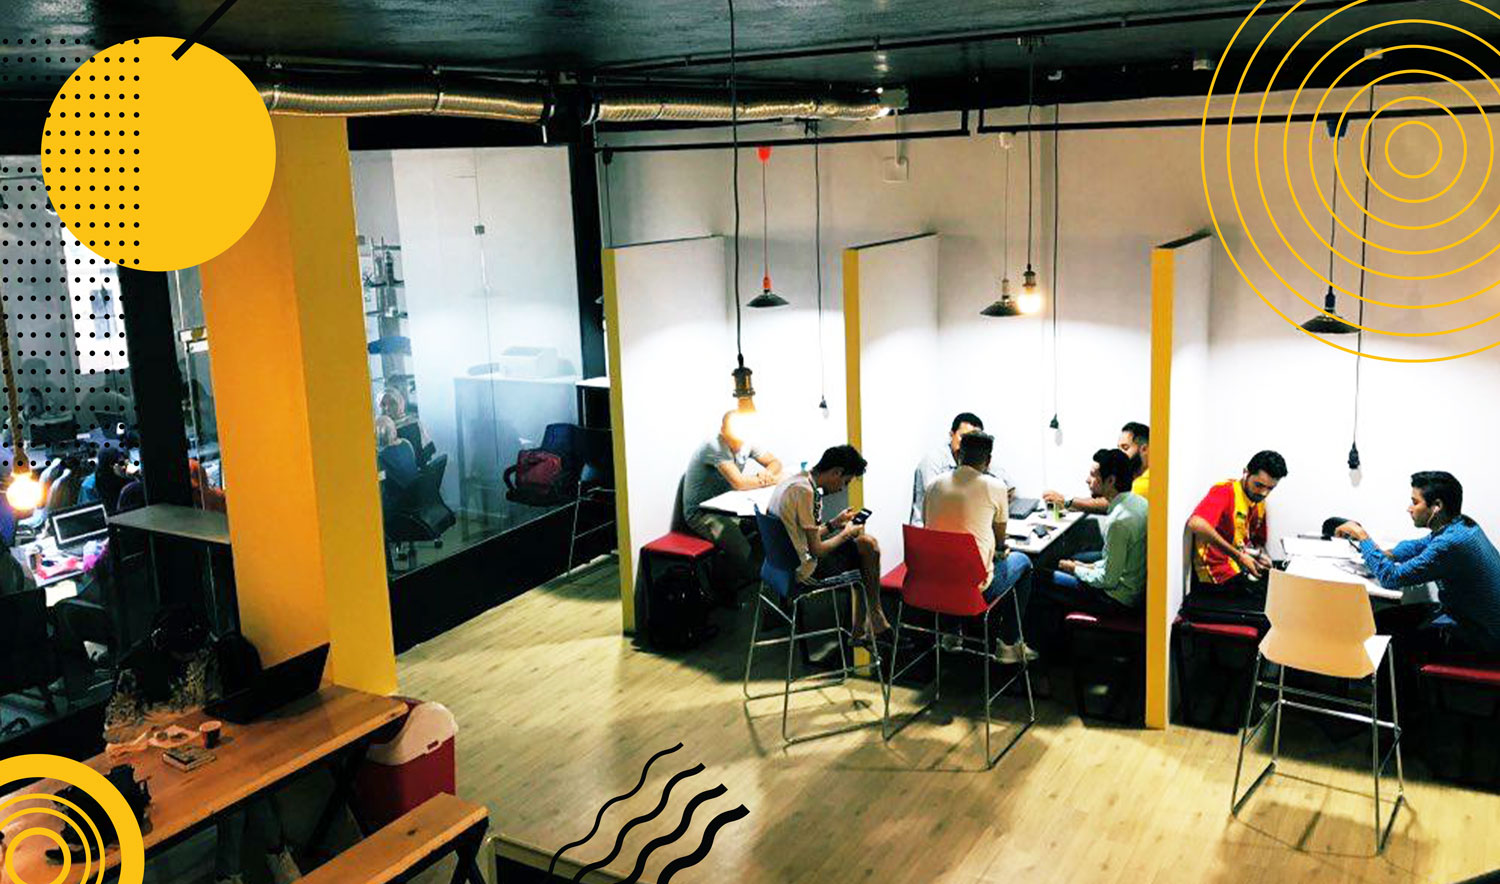 MORE THAN A CO-WORKING SPACE